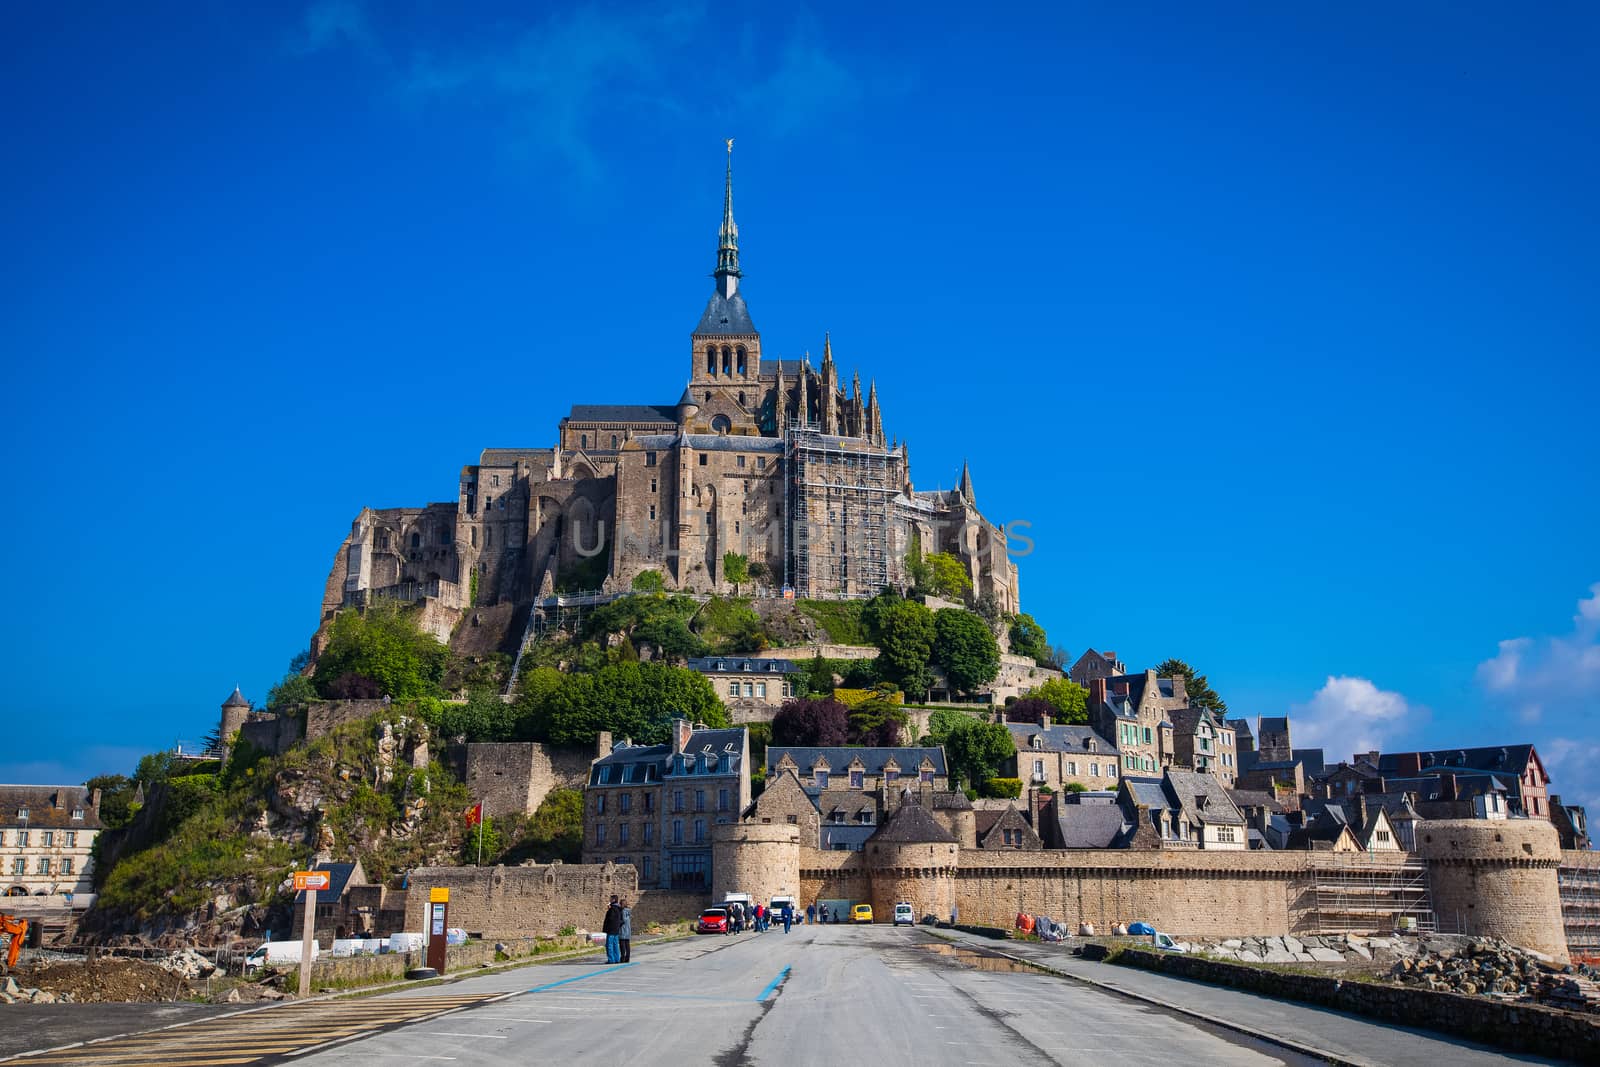 Mont St. Michel, the monastery on an island in Normandy